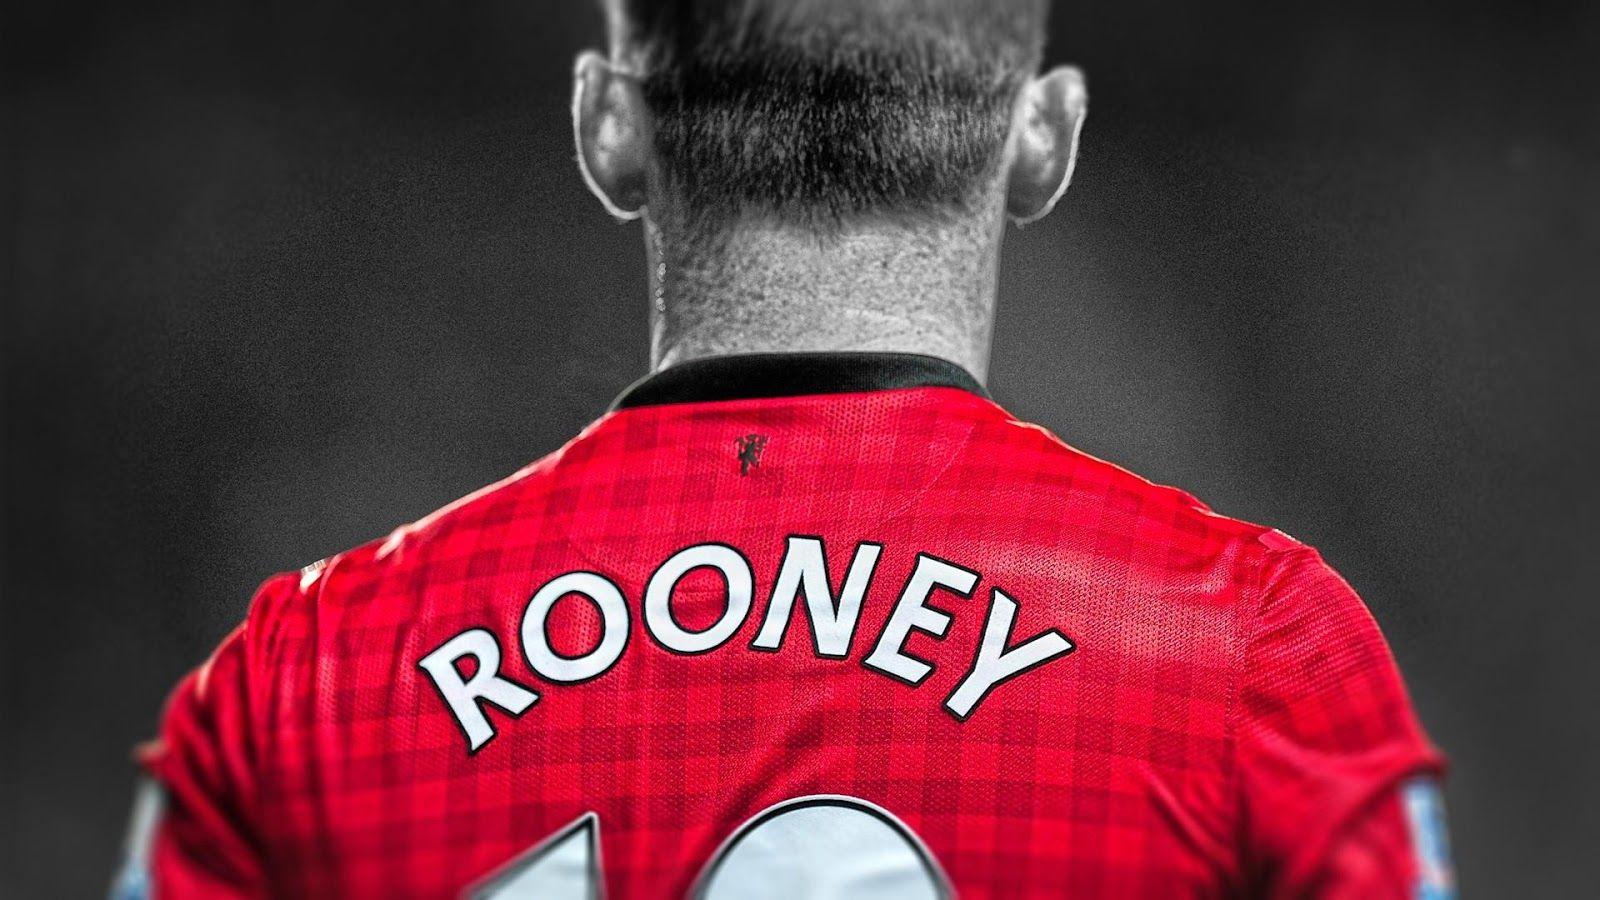 Wayne Rooney HD Wallpaper for (Android) Free Download on MoboMarket